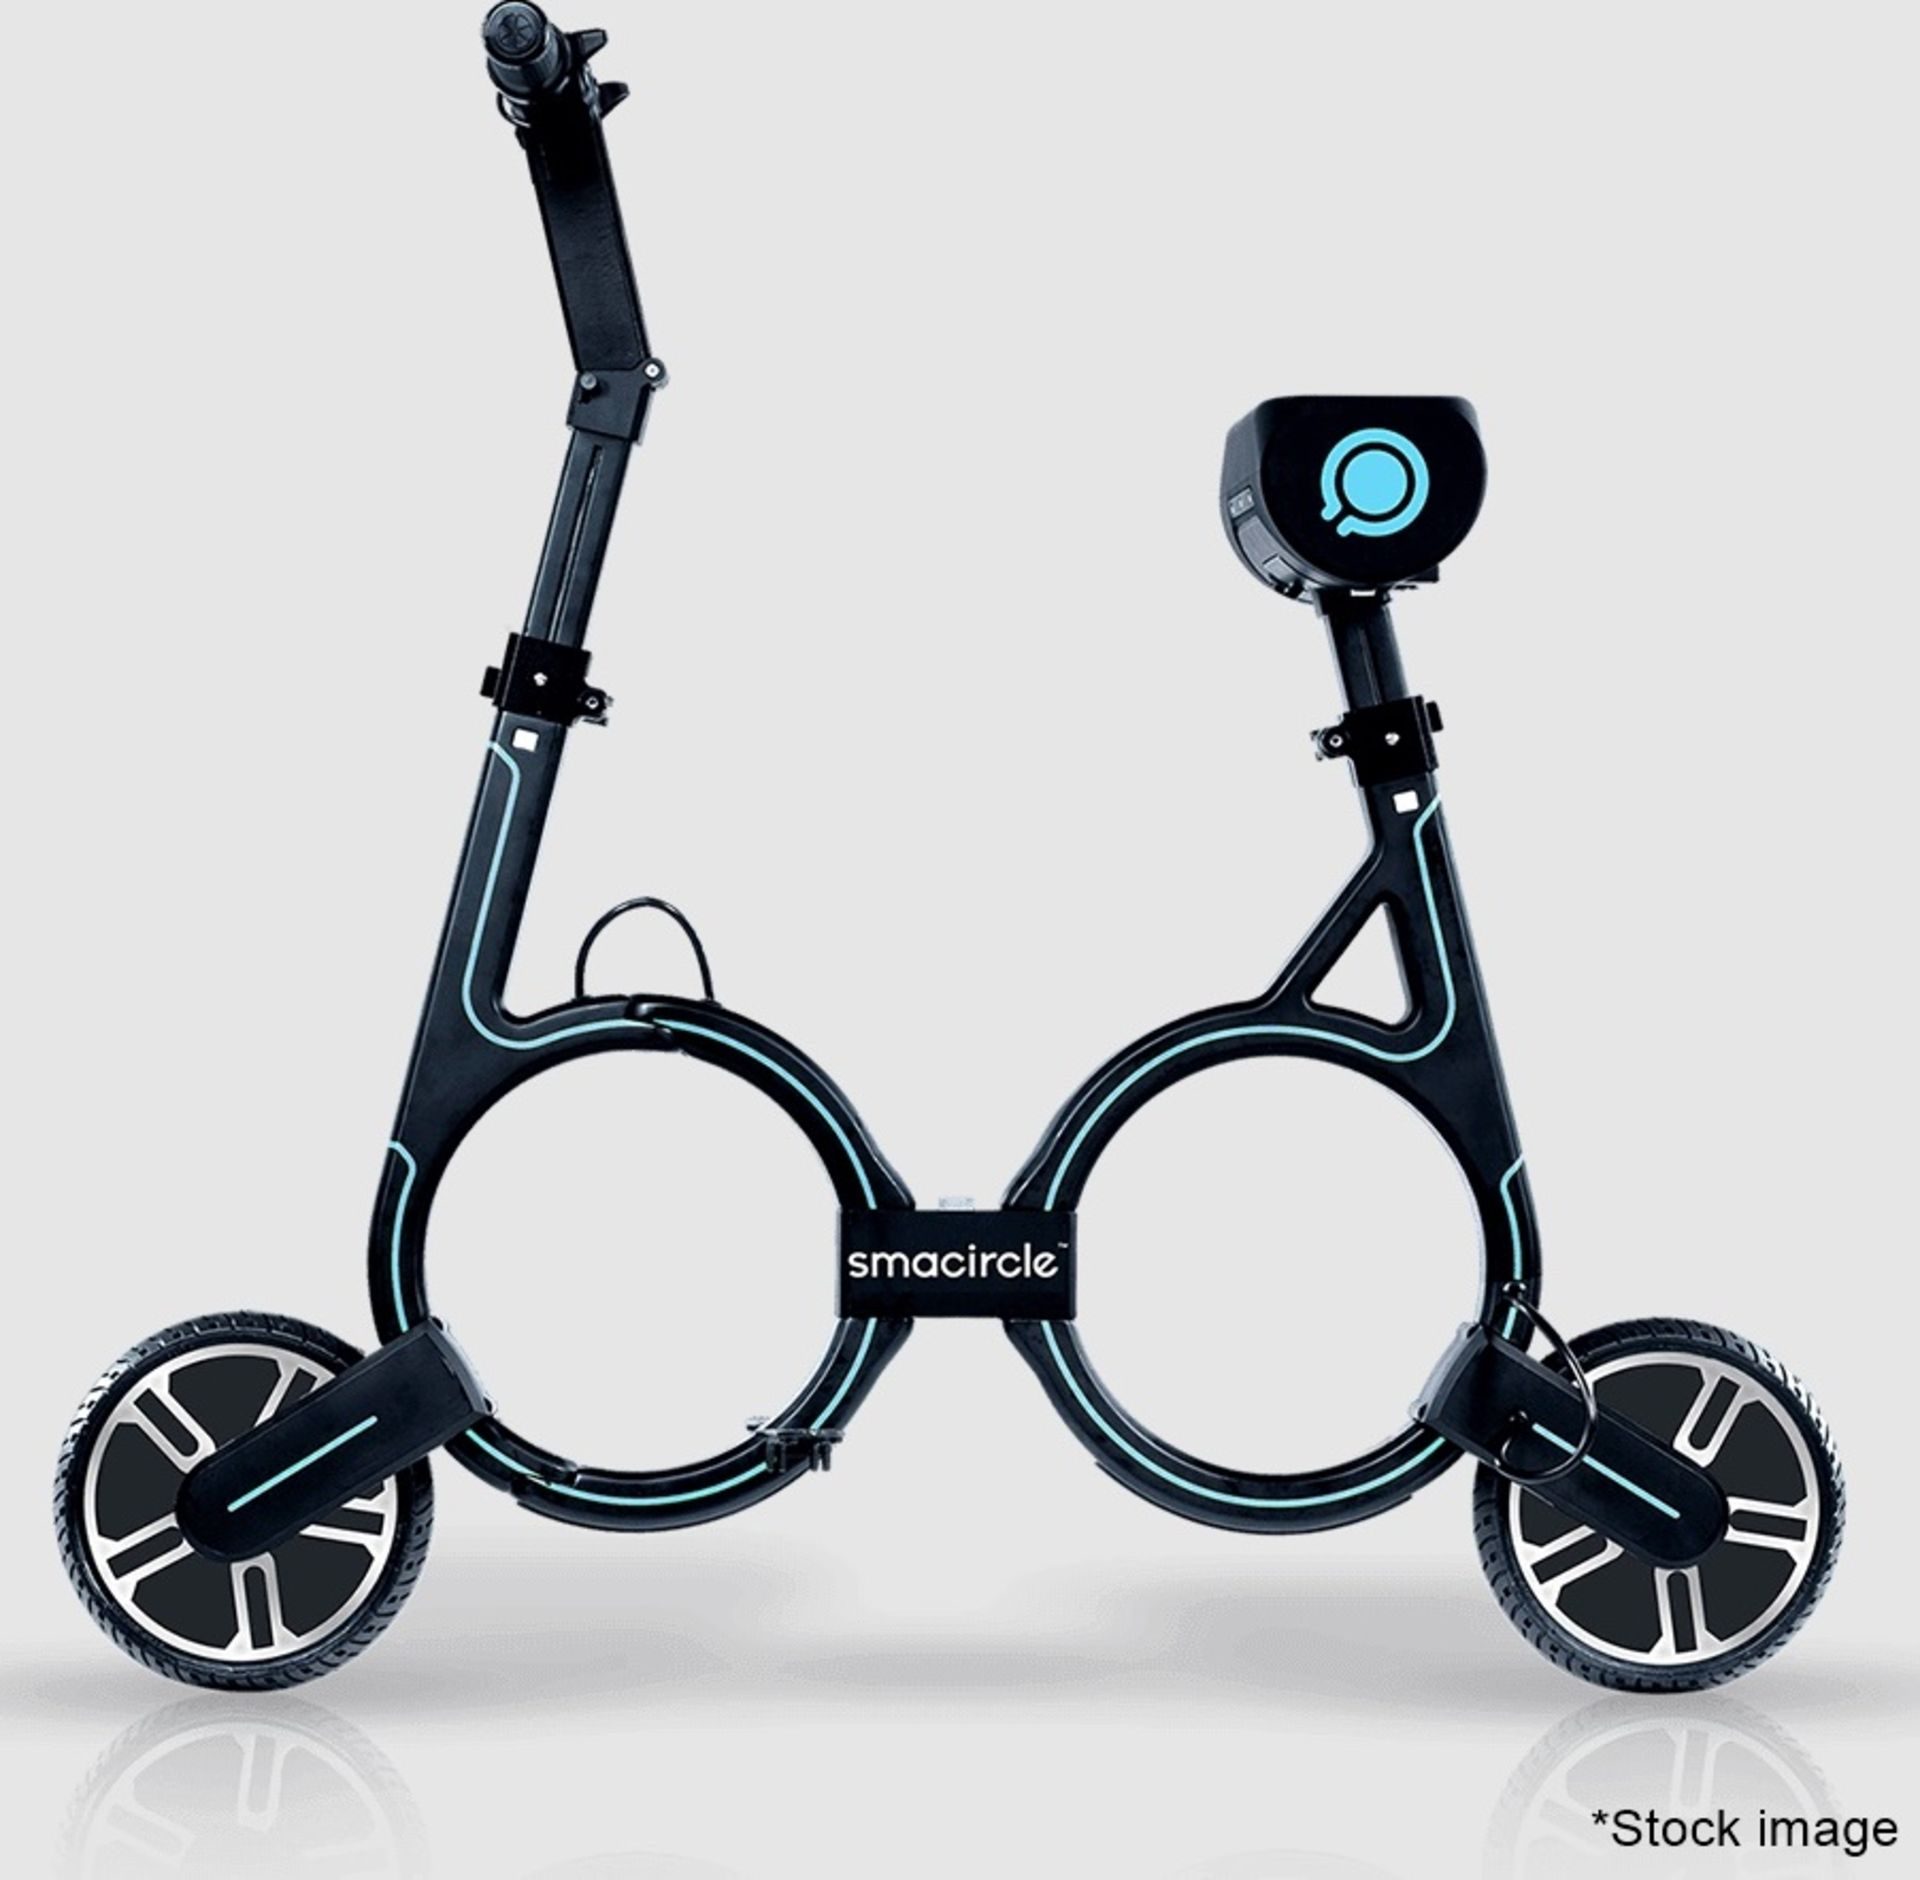 1 x SMACIRCLE S1 Super Compact Foldable Electric Bike - Original RRP £1,299 - Boxed with Accessories